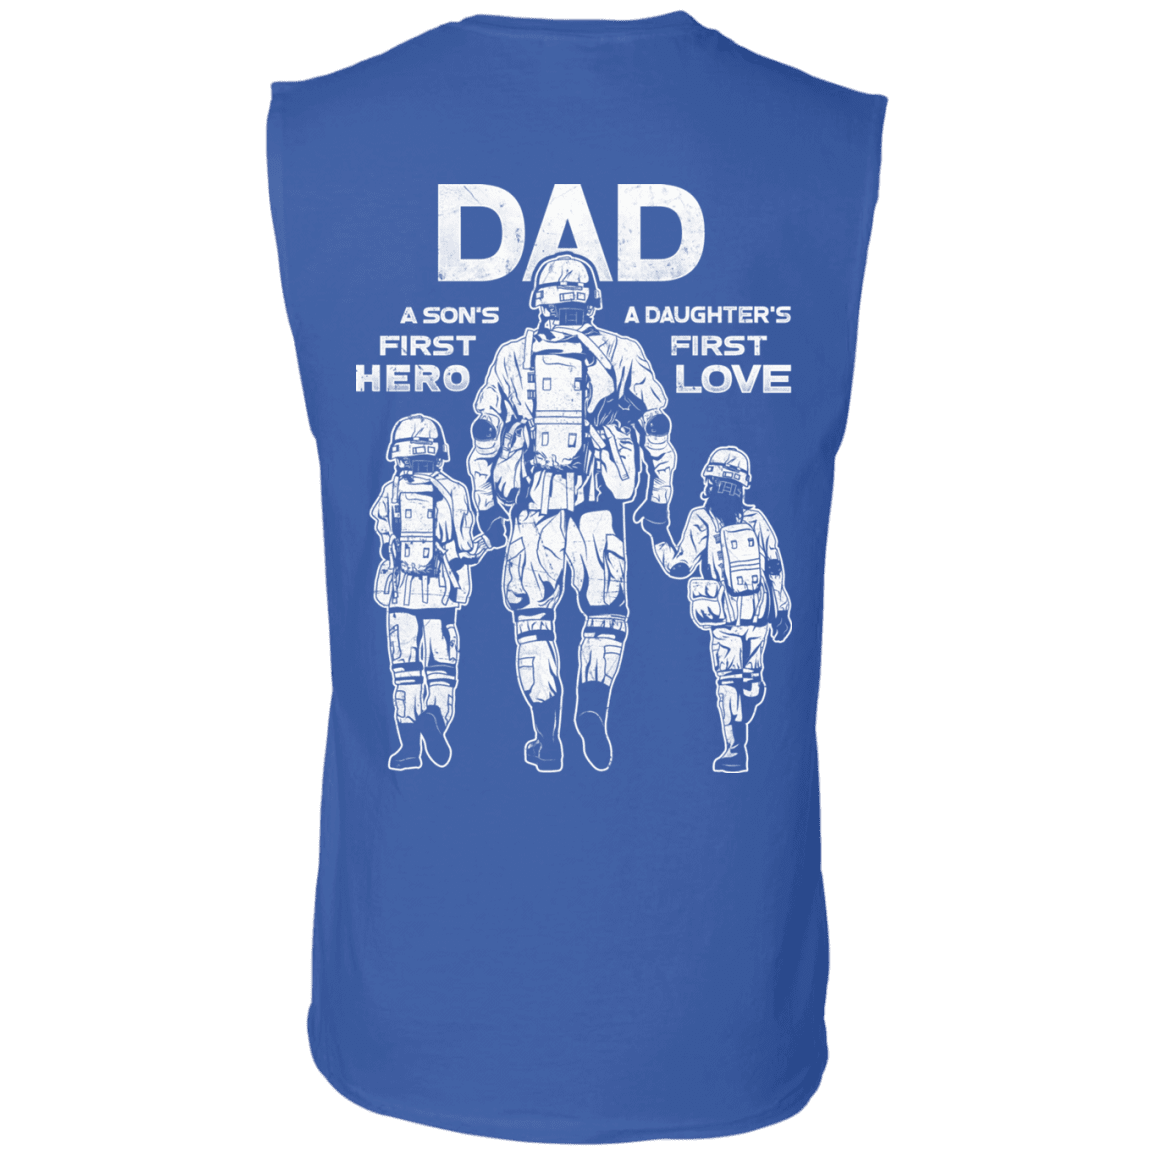 Military T-Shirt "Dad A Son's First Hero Daughter's First Love" Men Back-TShirt-General-Veterans Nation